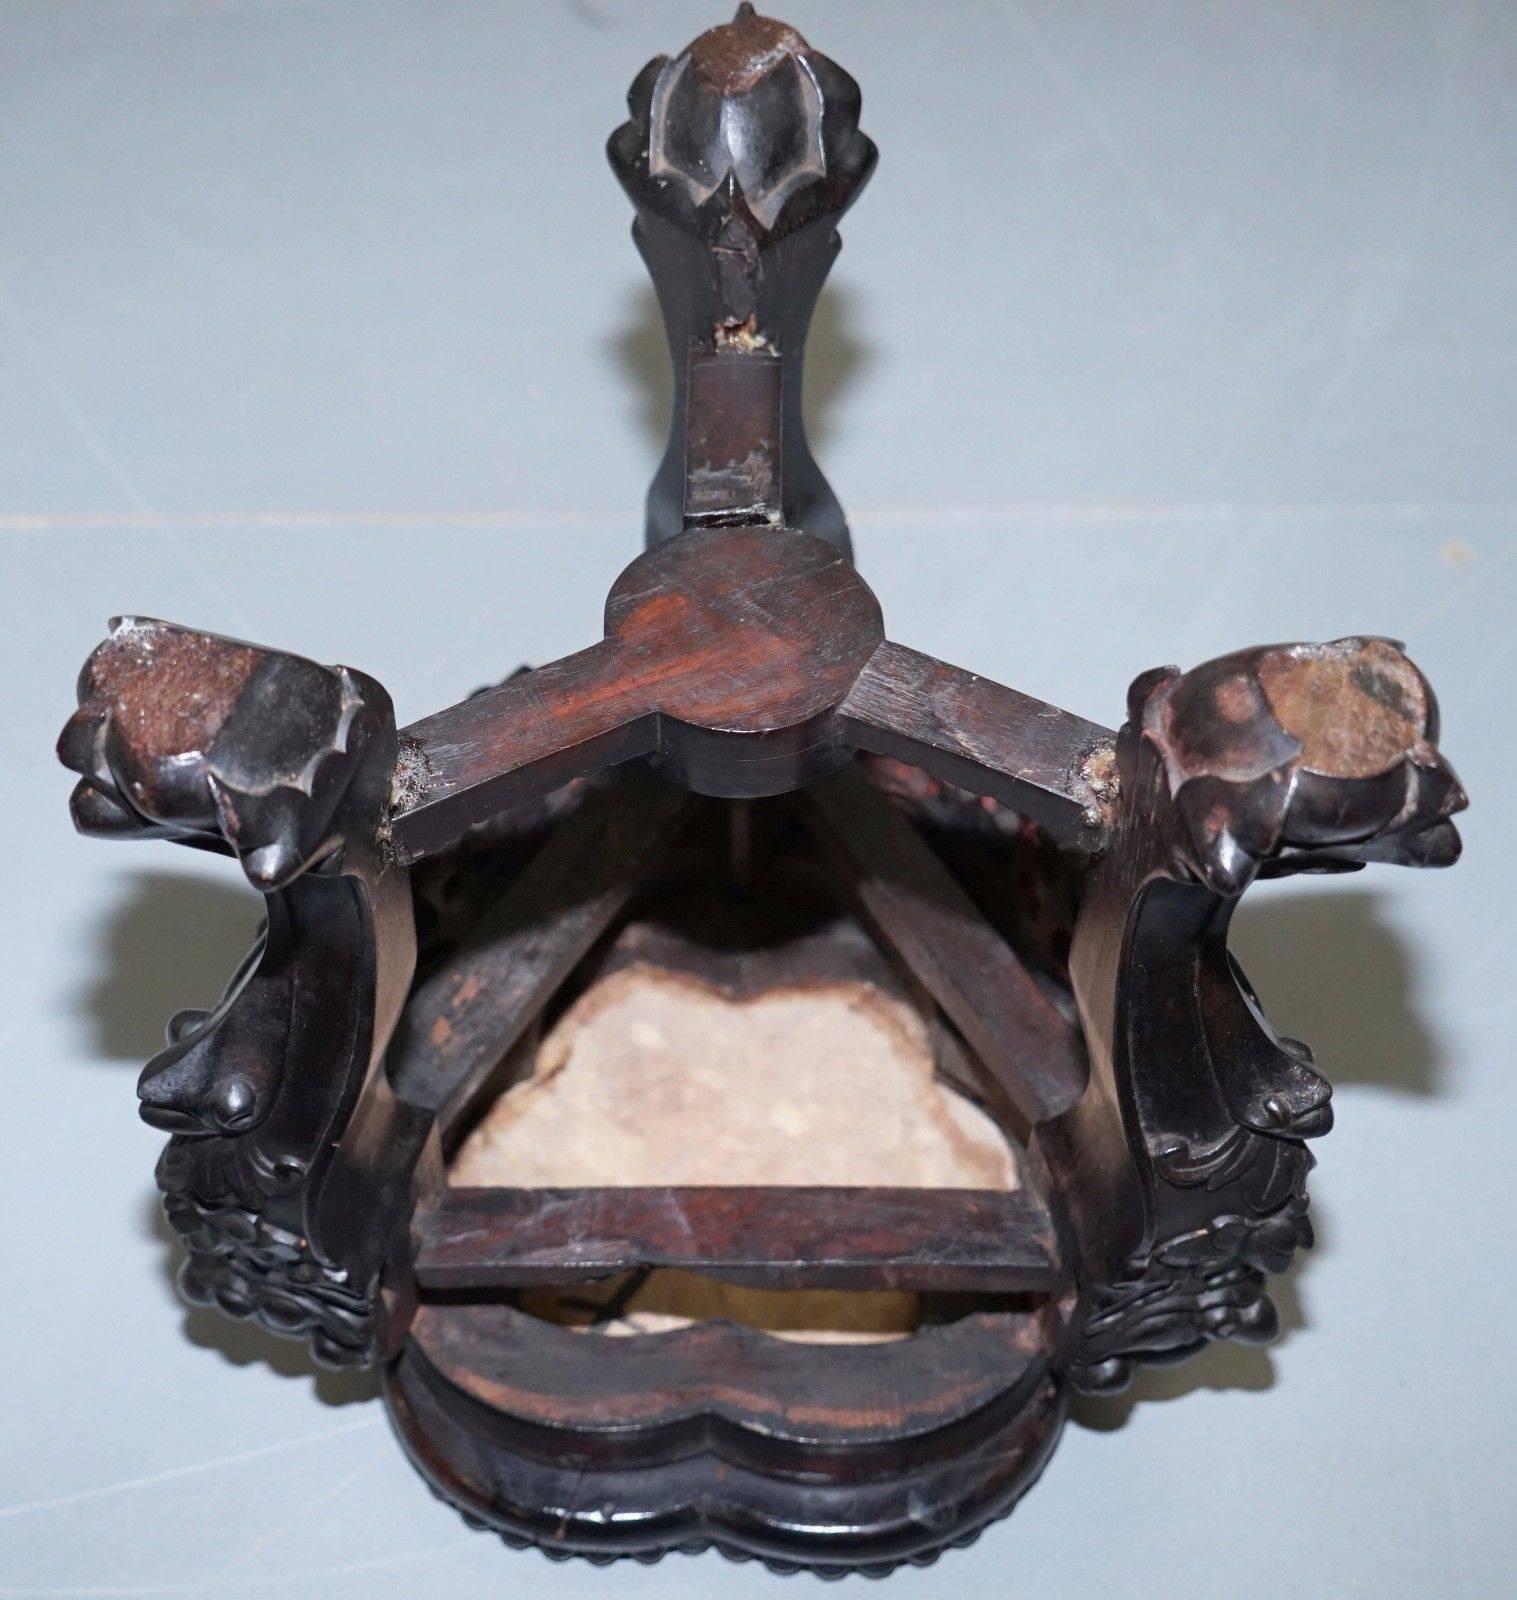 Lovely 19th Century Carved Wood Chinese Pot Vase Stand with Marble Top Rare Find 2